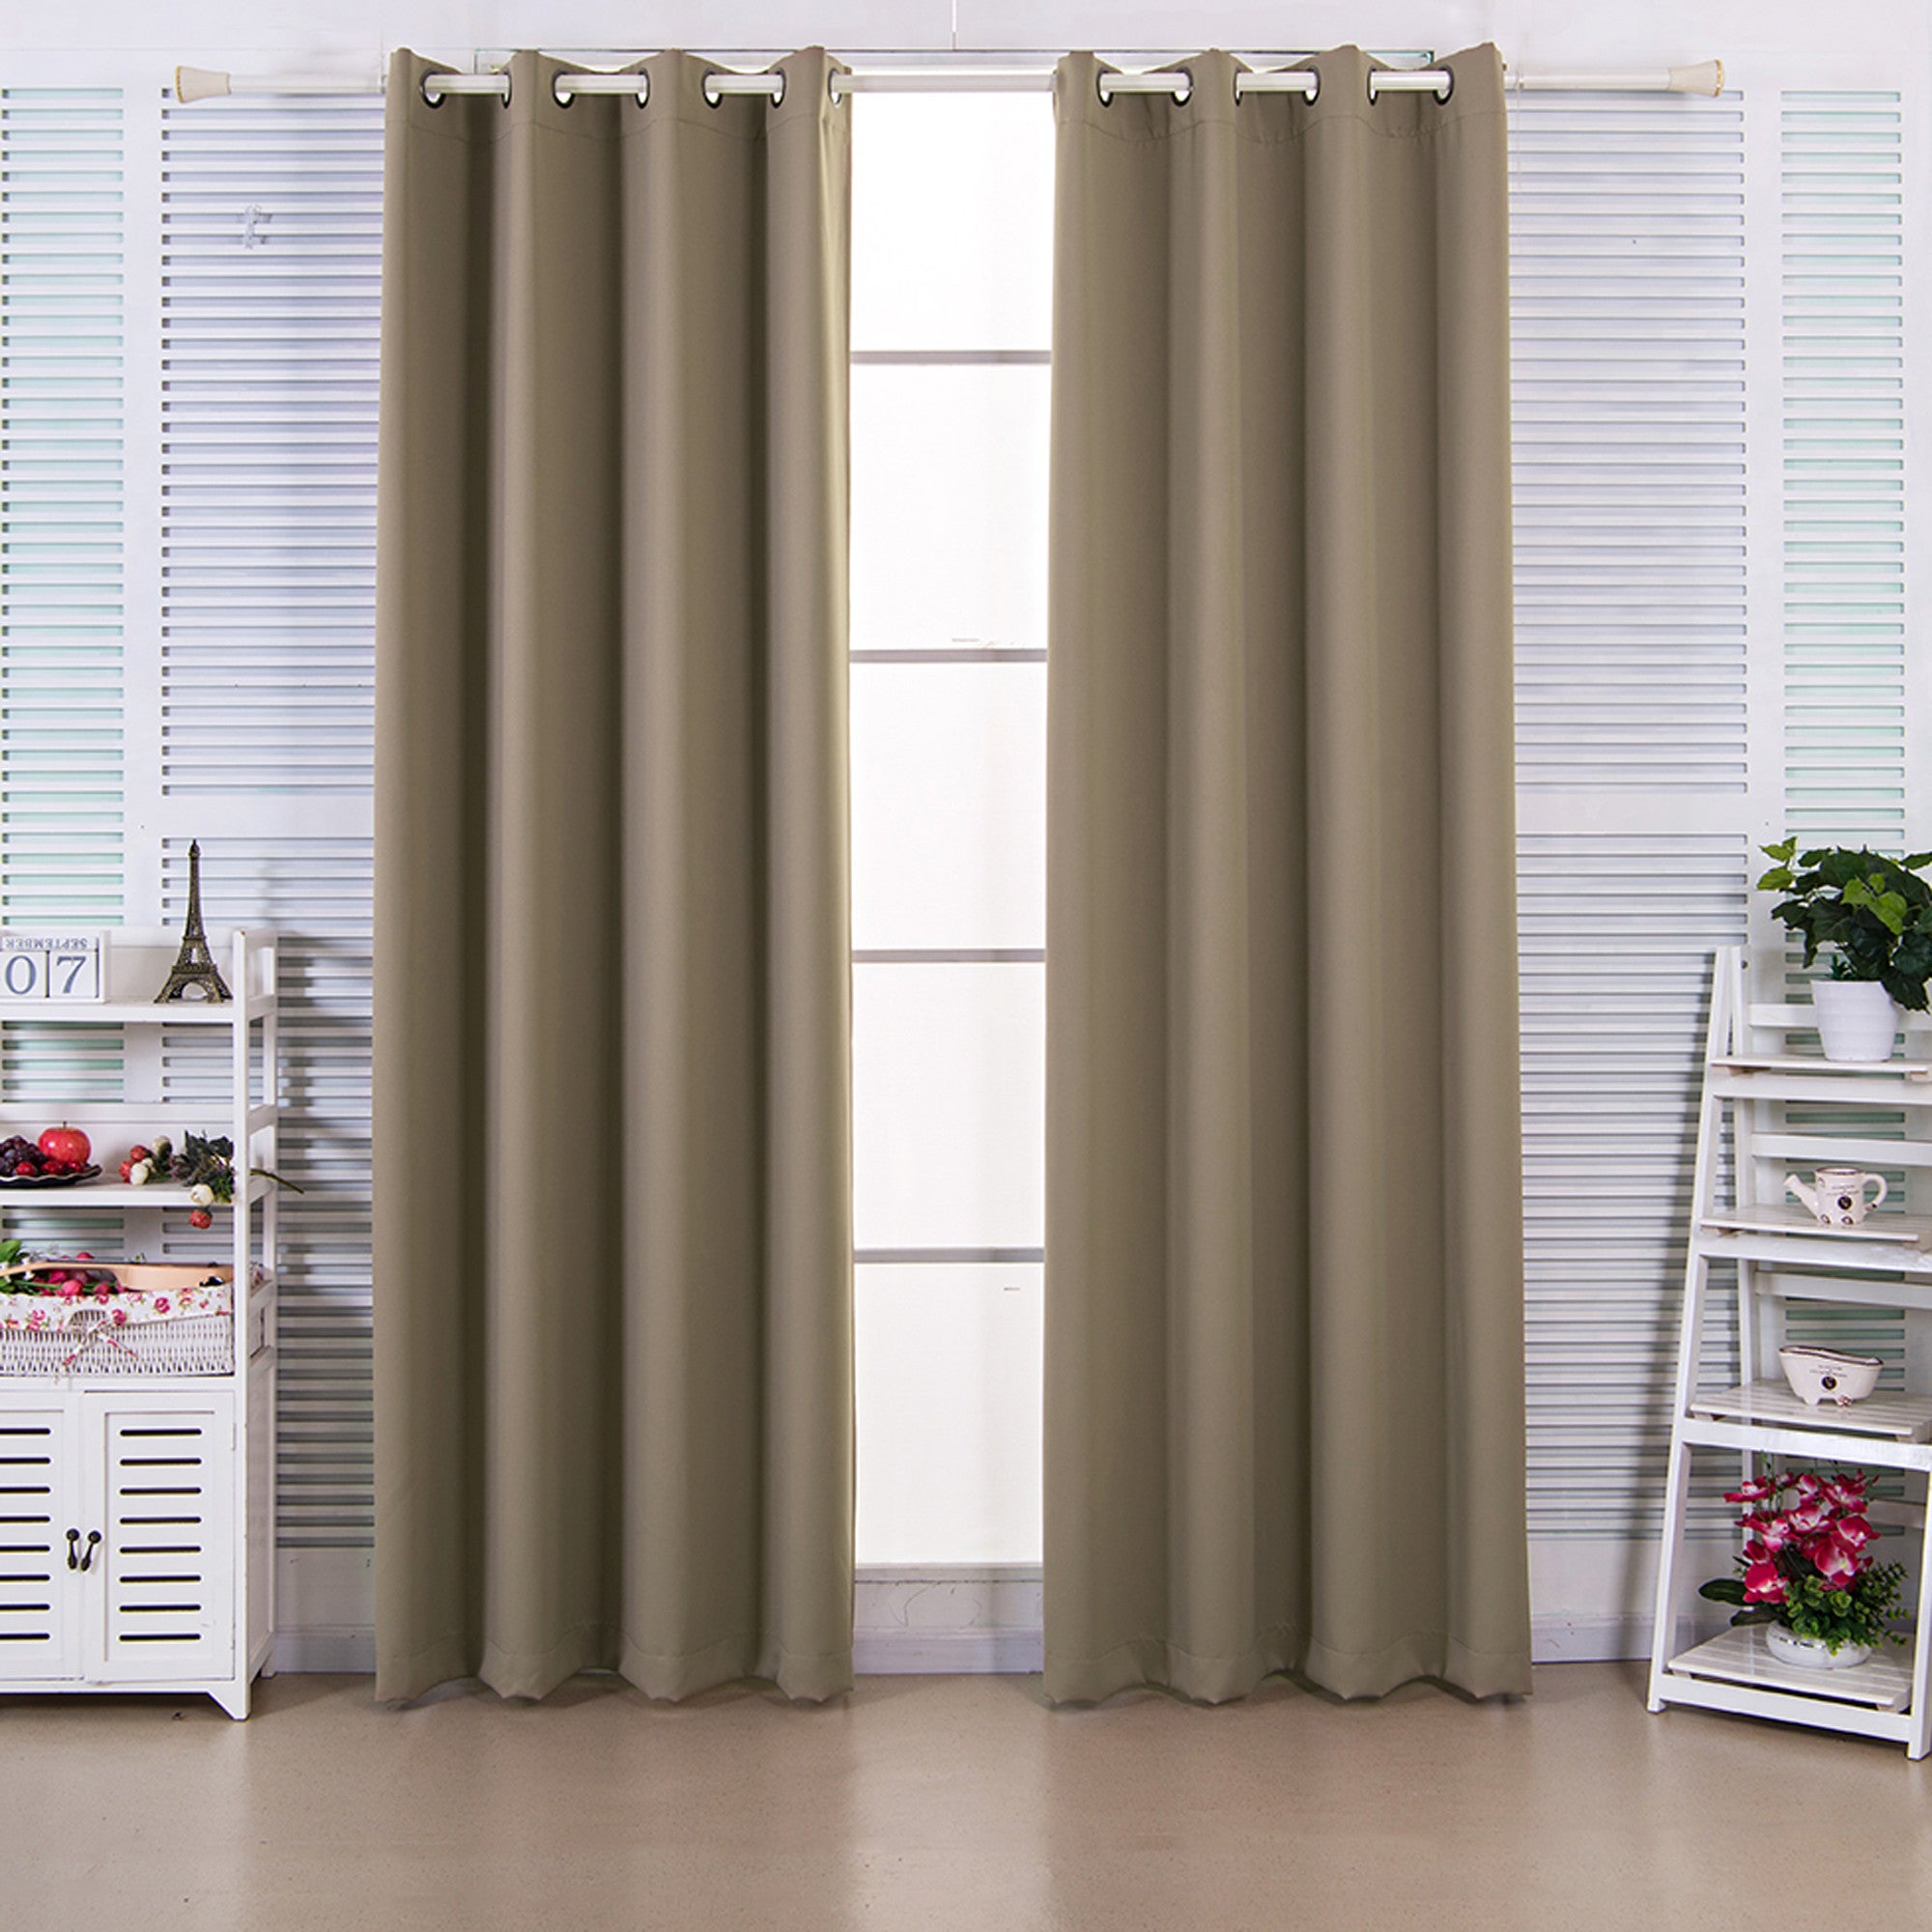 Teamson Home 96" Ephesus Insulated Thermal Blackout Grommet Window Panels with Grommets, Sepia Brown